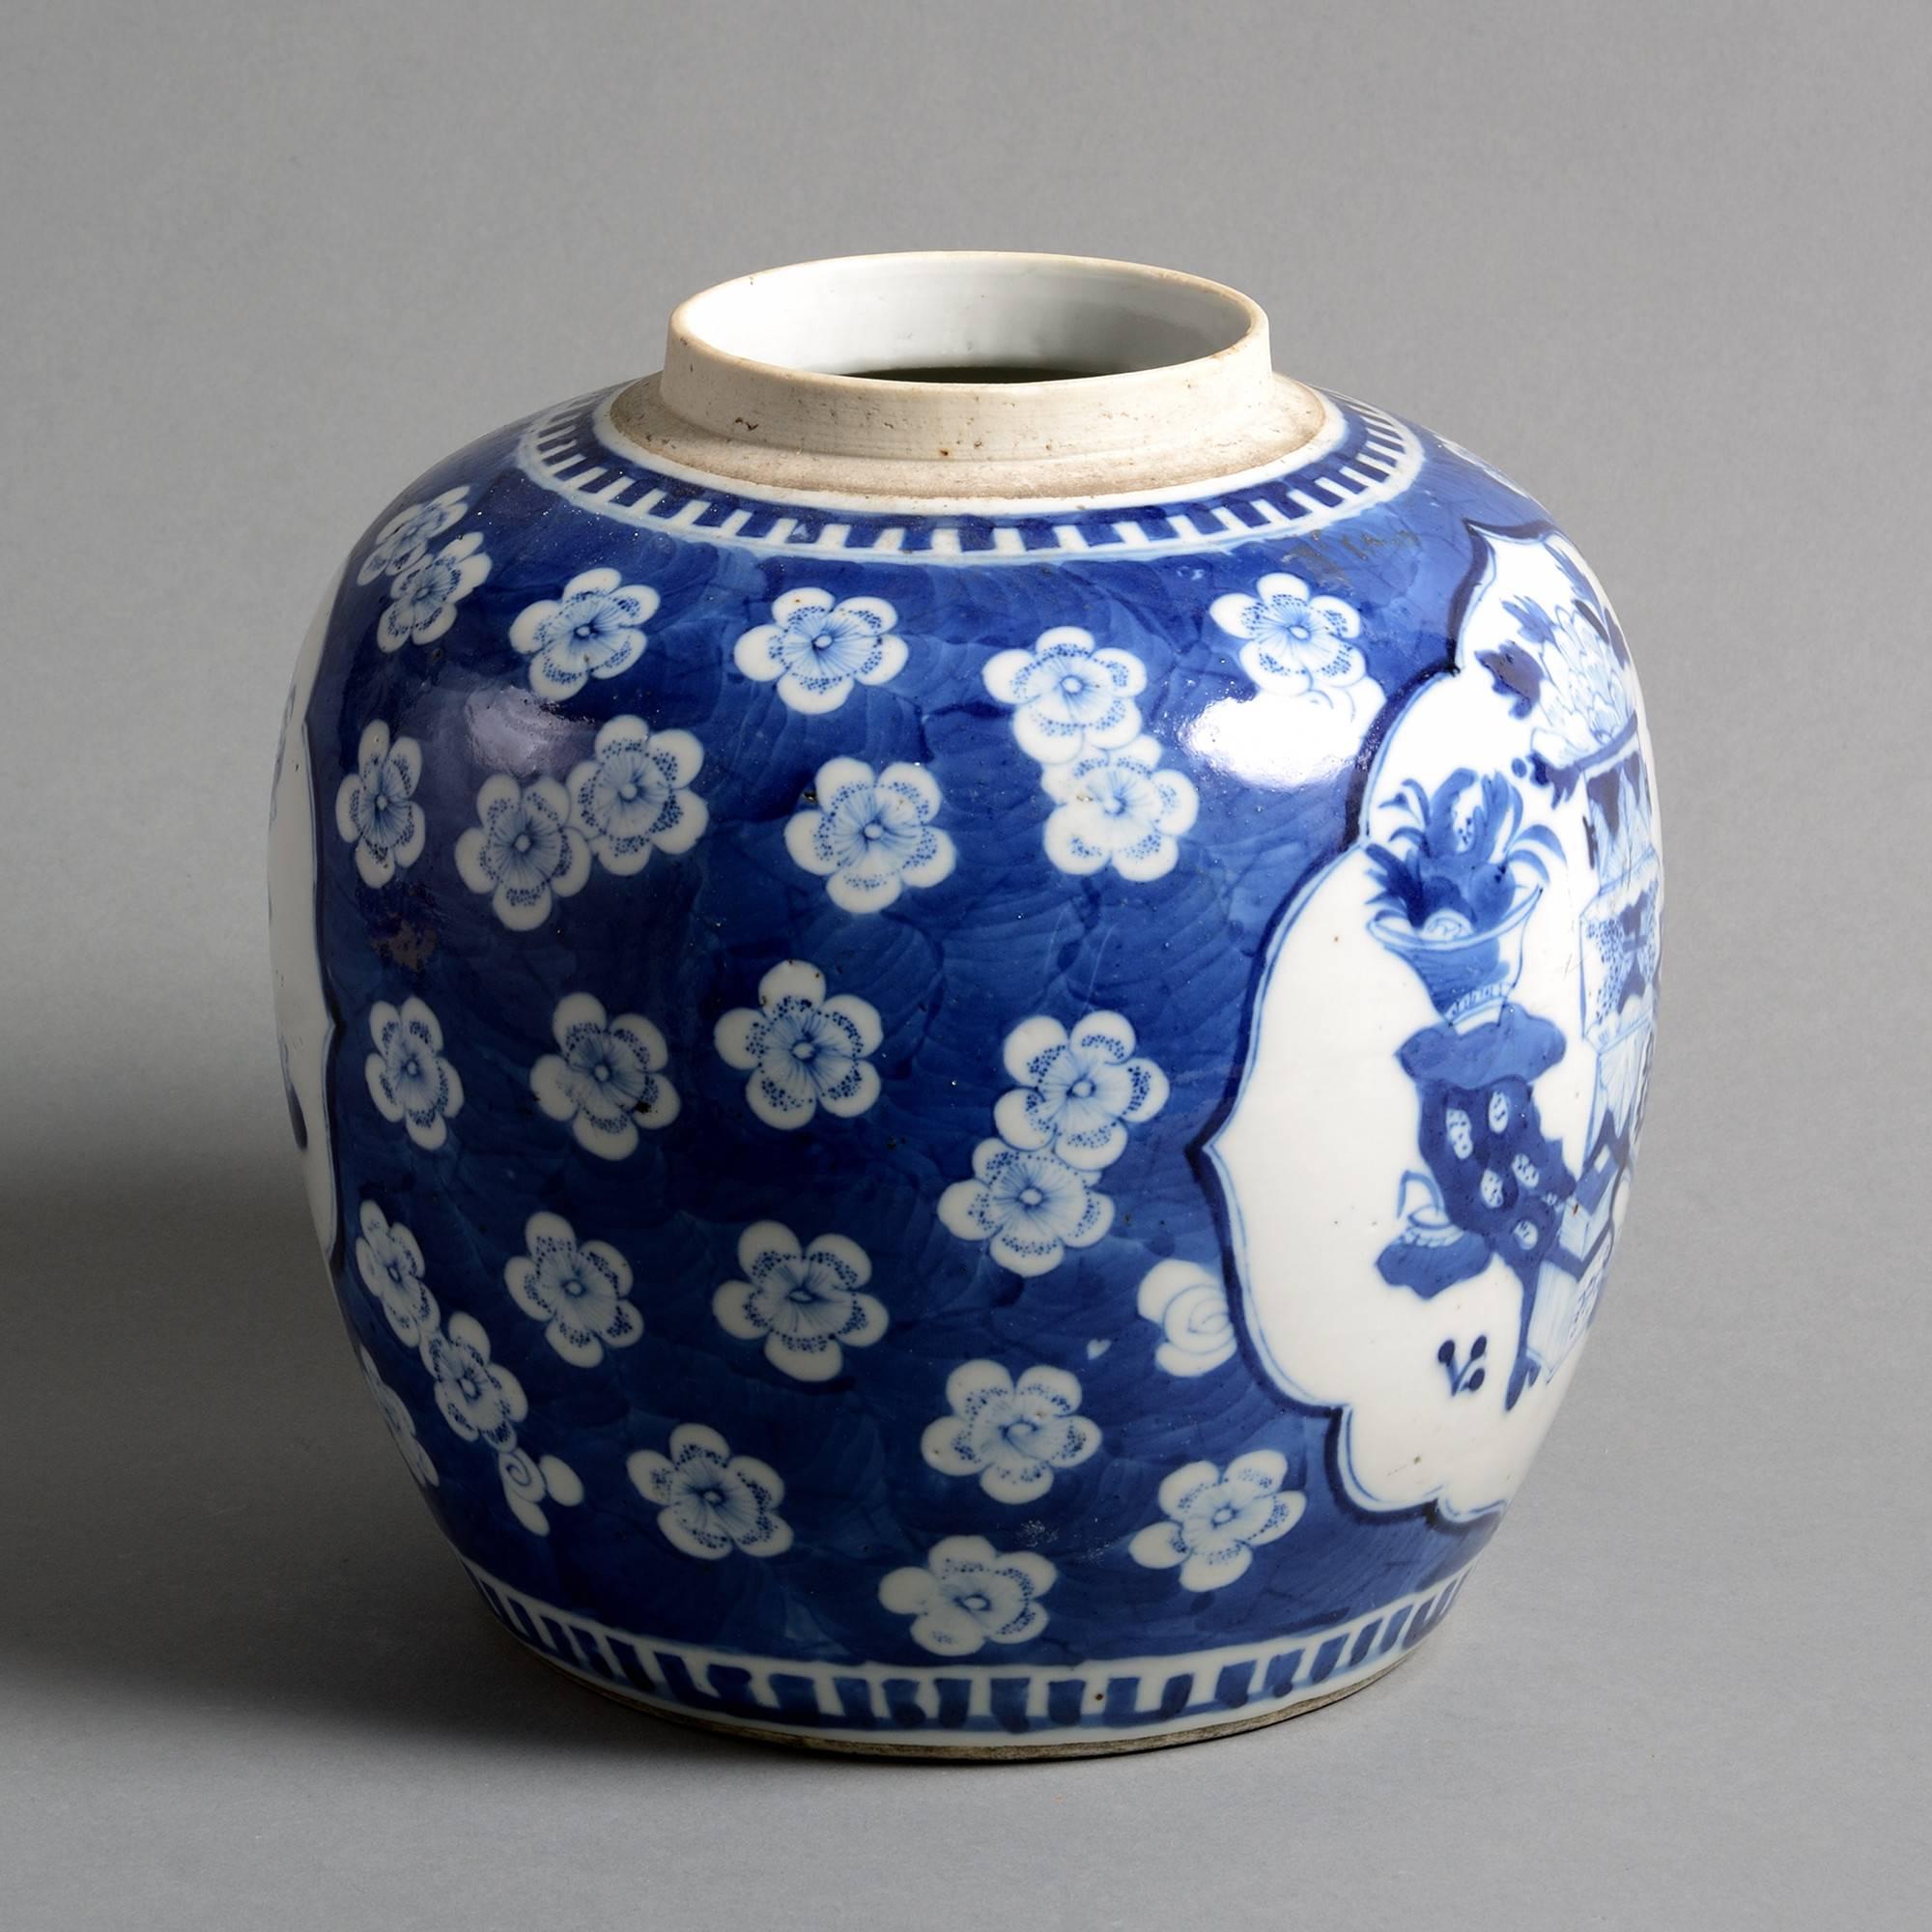 A 19th century blue and white glazed porcelain jar, the body decorated with cartouches of domestic furniture and objects upon a blue ground of white prunus blossom. 

Made for the European export market. 

Qing dynasty, Guangxu period.
  